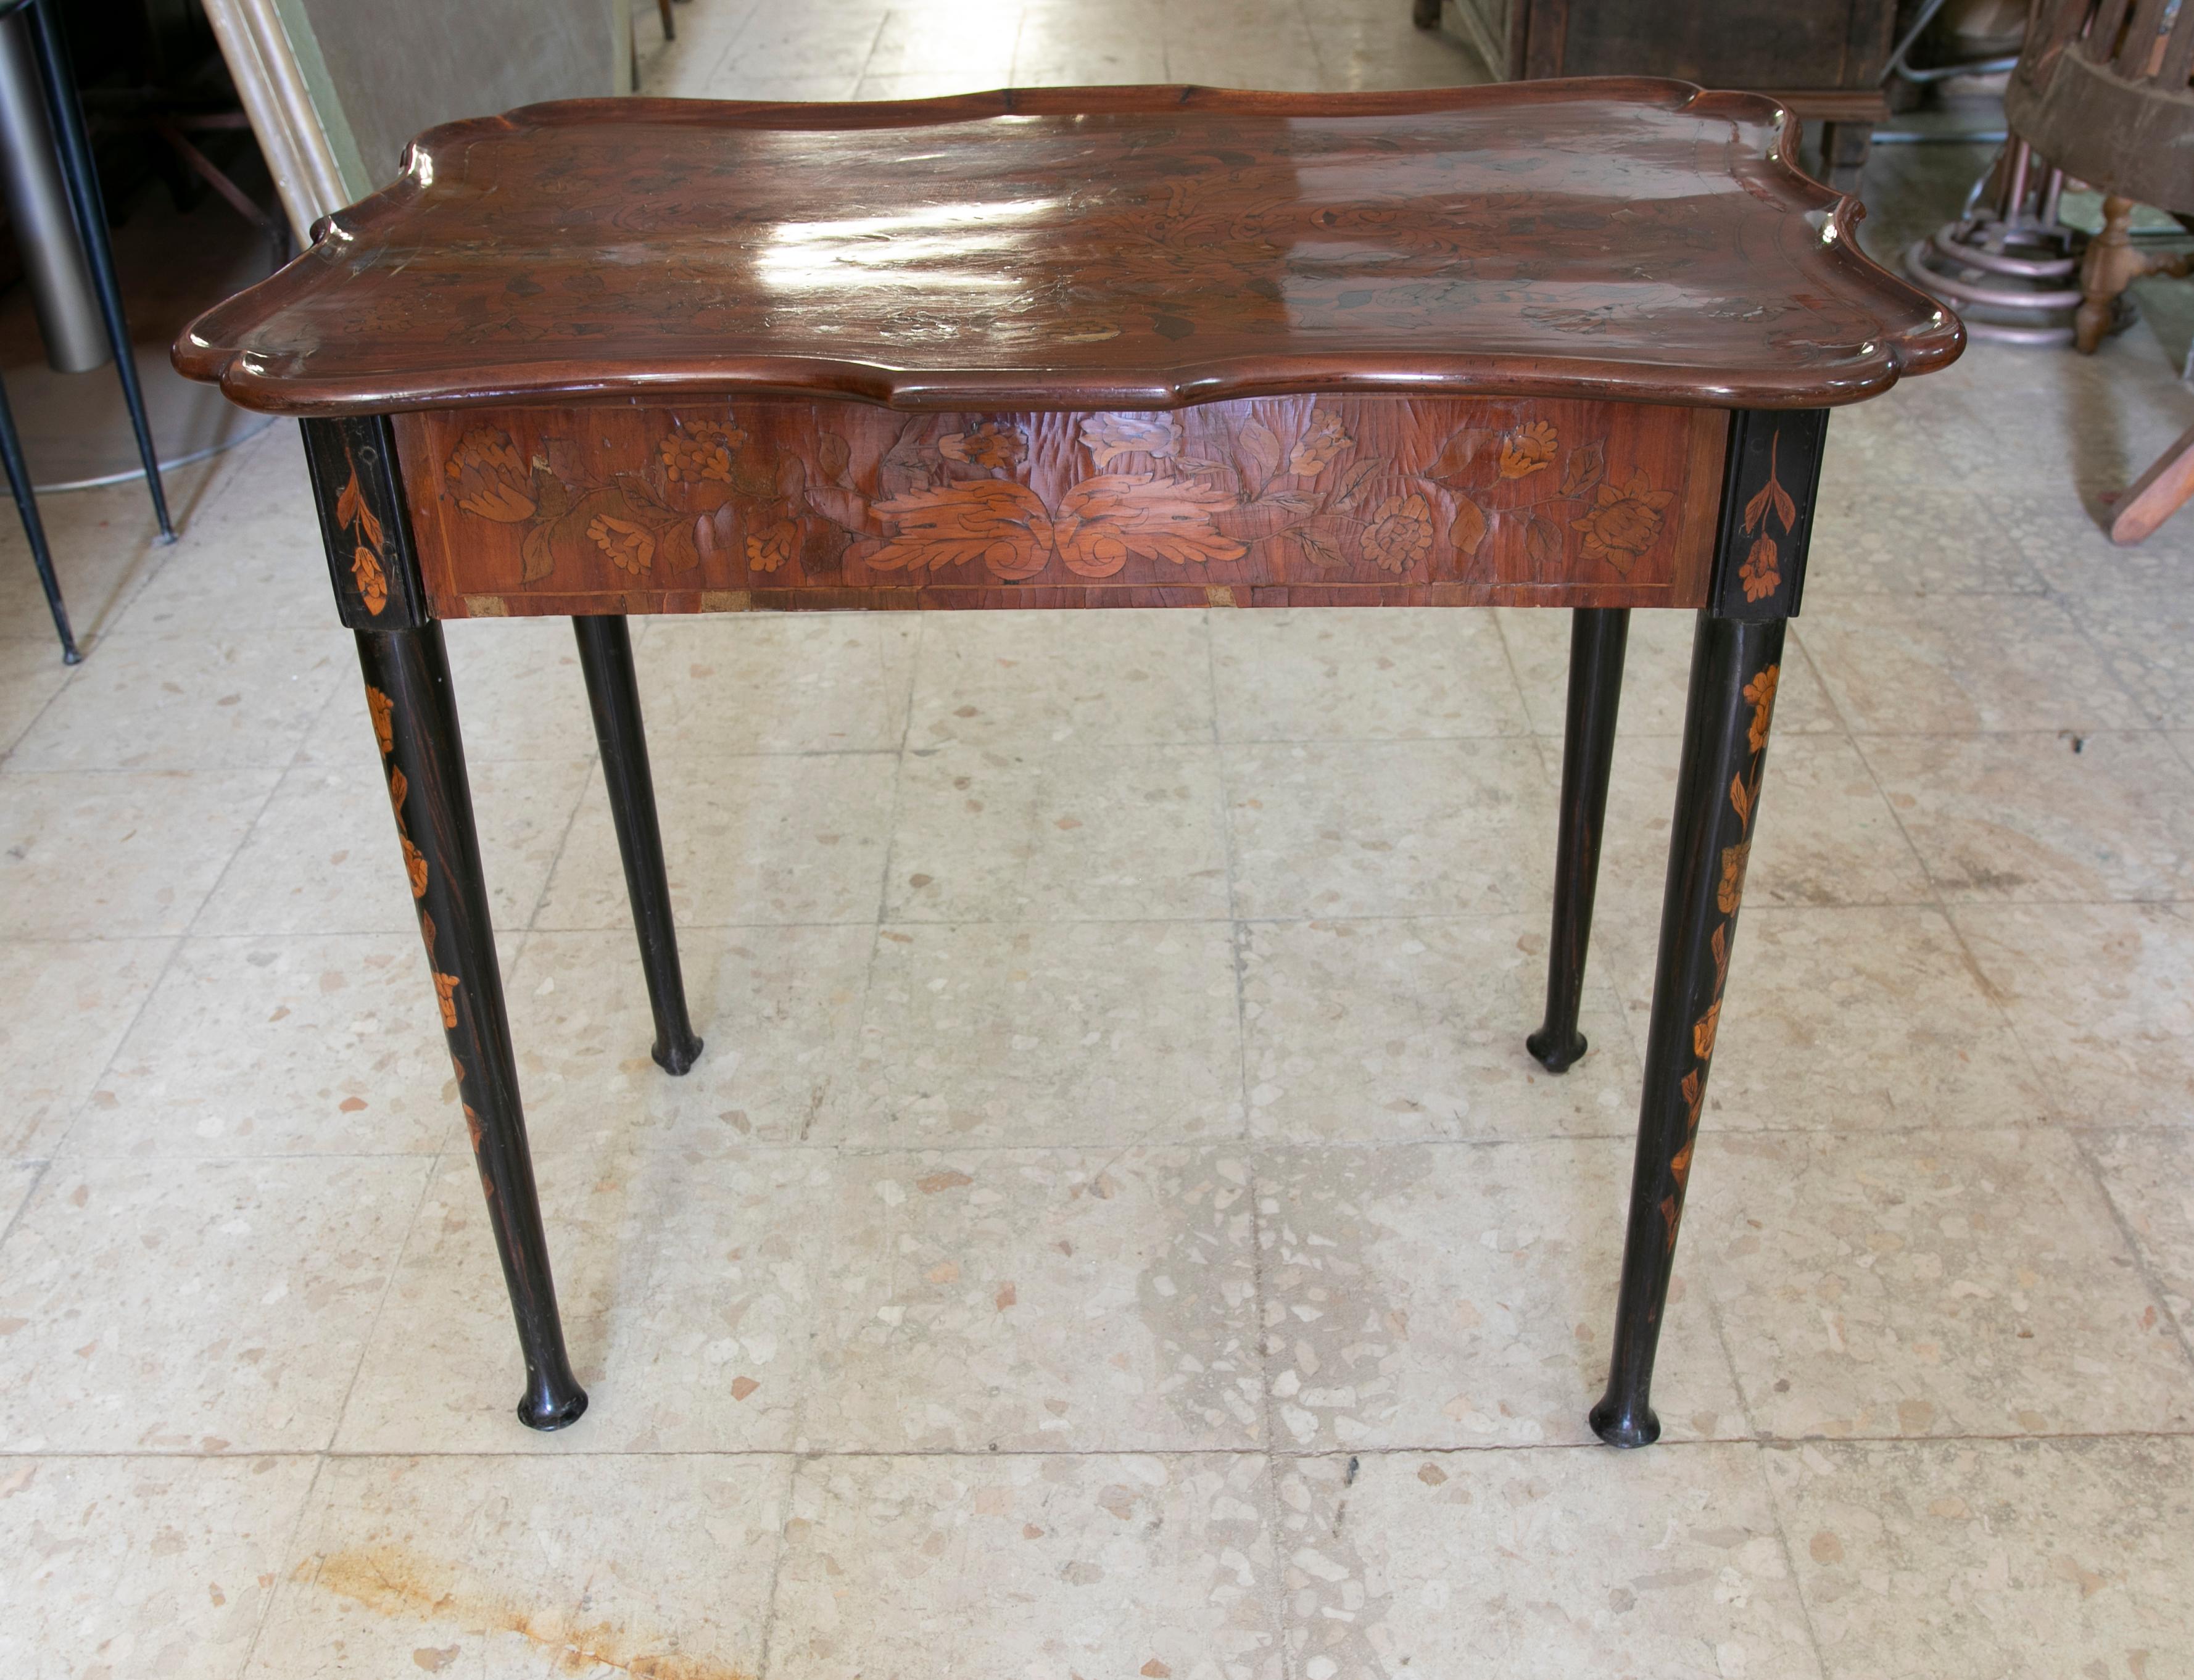 Mahogany sidetable with marquetry and floral decoration.